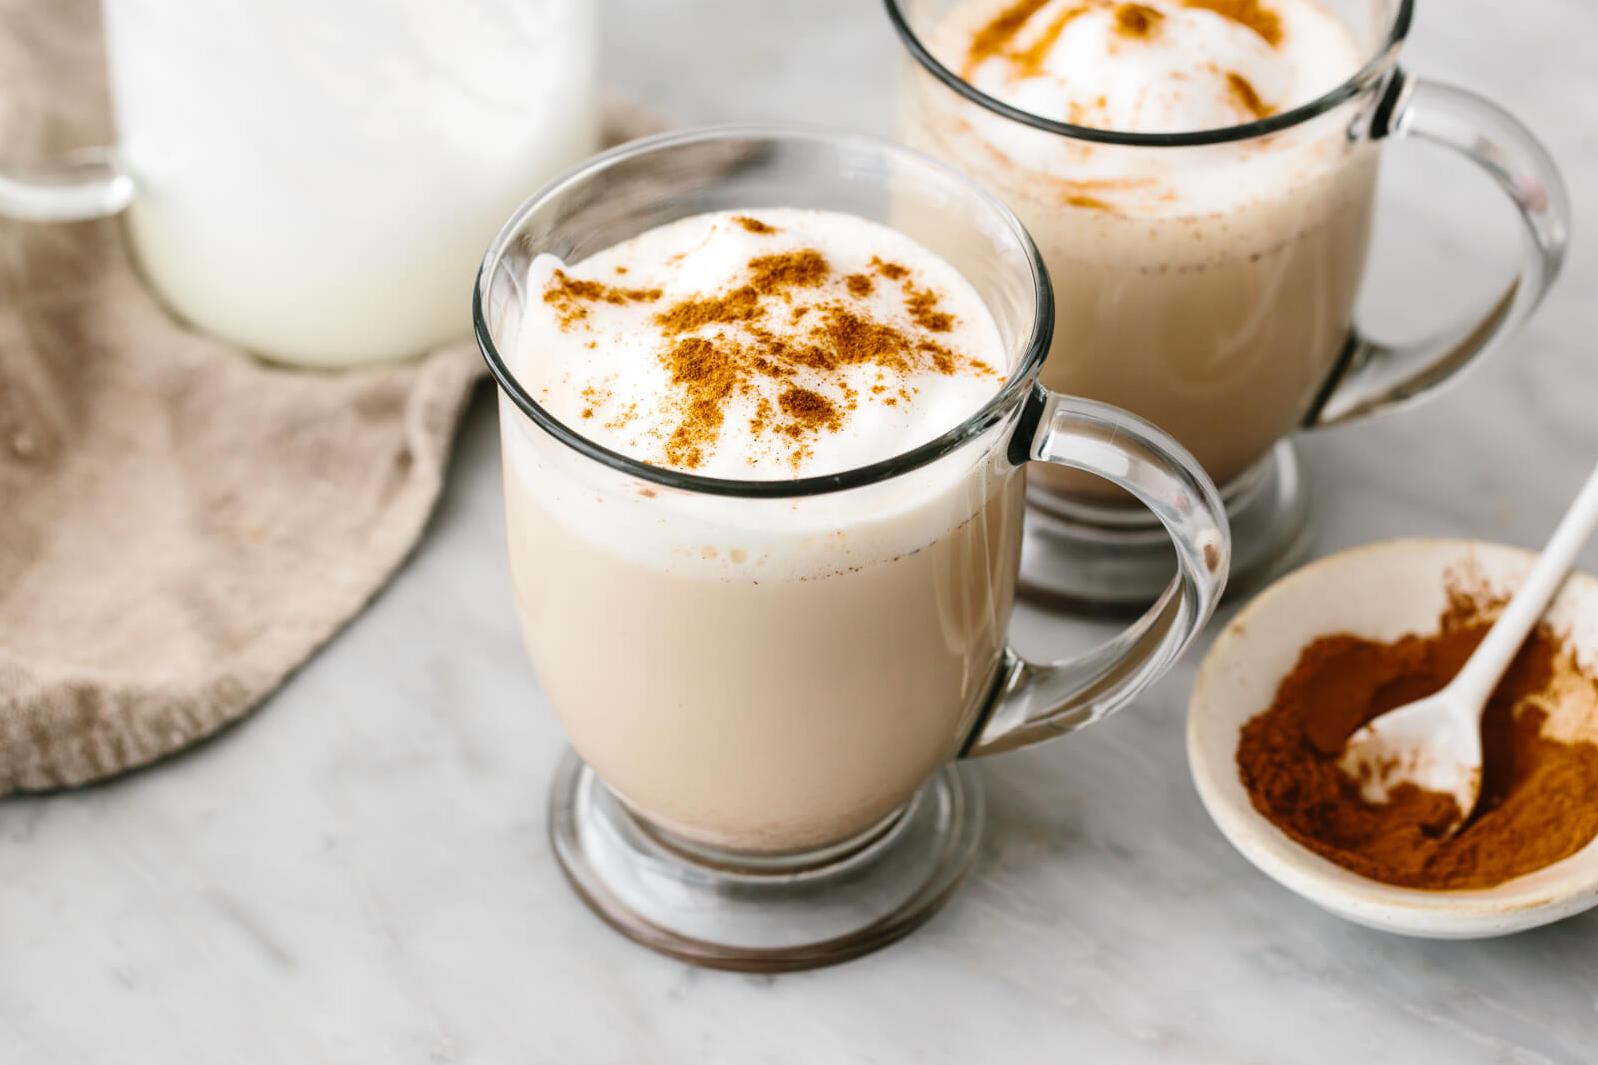  Warm up your soul with this delicious Chai Latte!